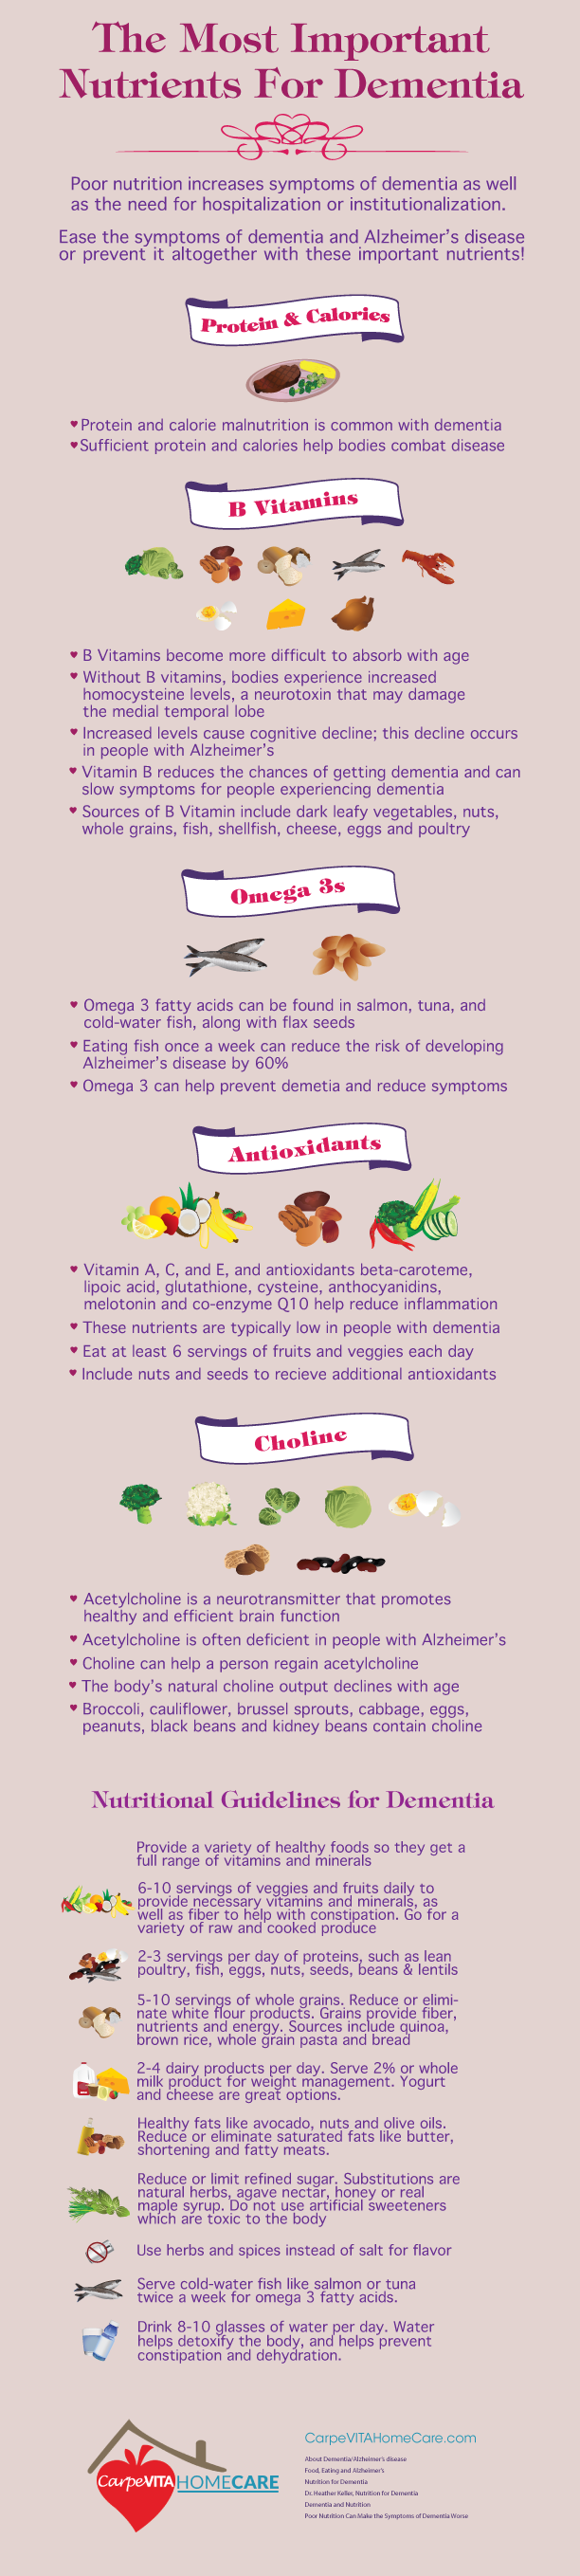 Infographic-The-Most-Important-Nutrients-for-Dementia-